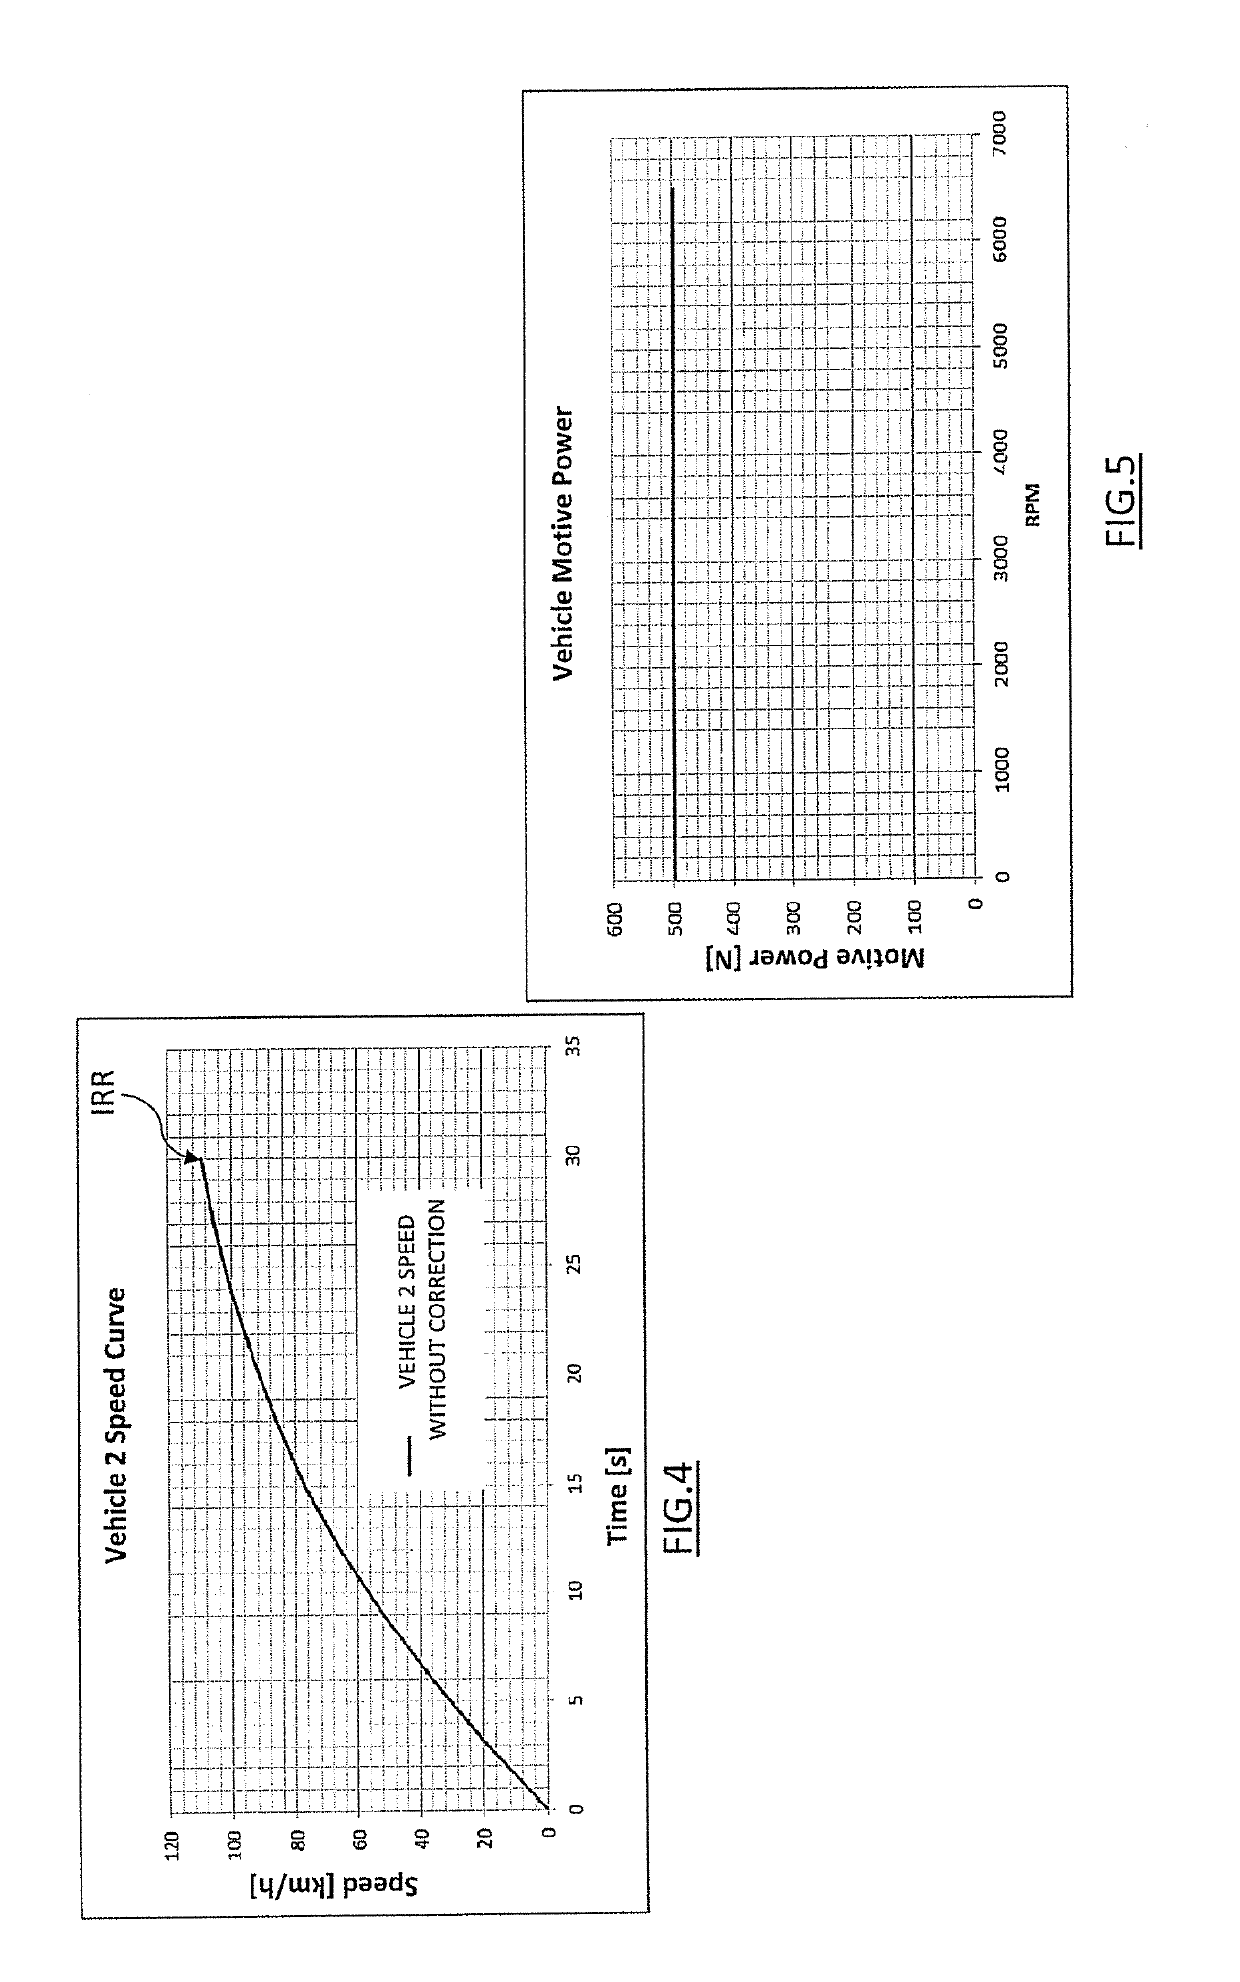 Method and apparatus for automatic adjustment of a vehicle to a predetermined performance condition